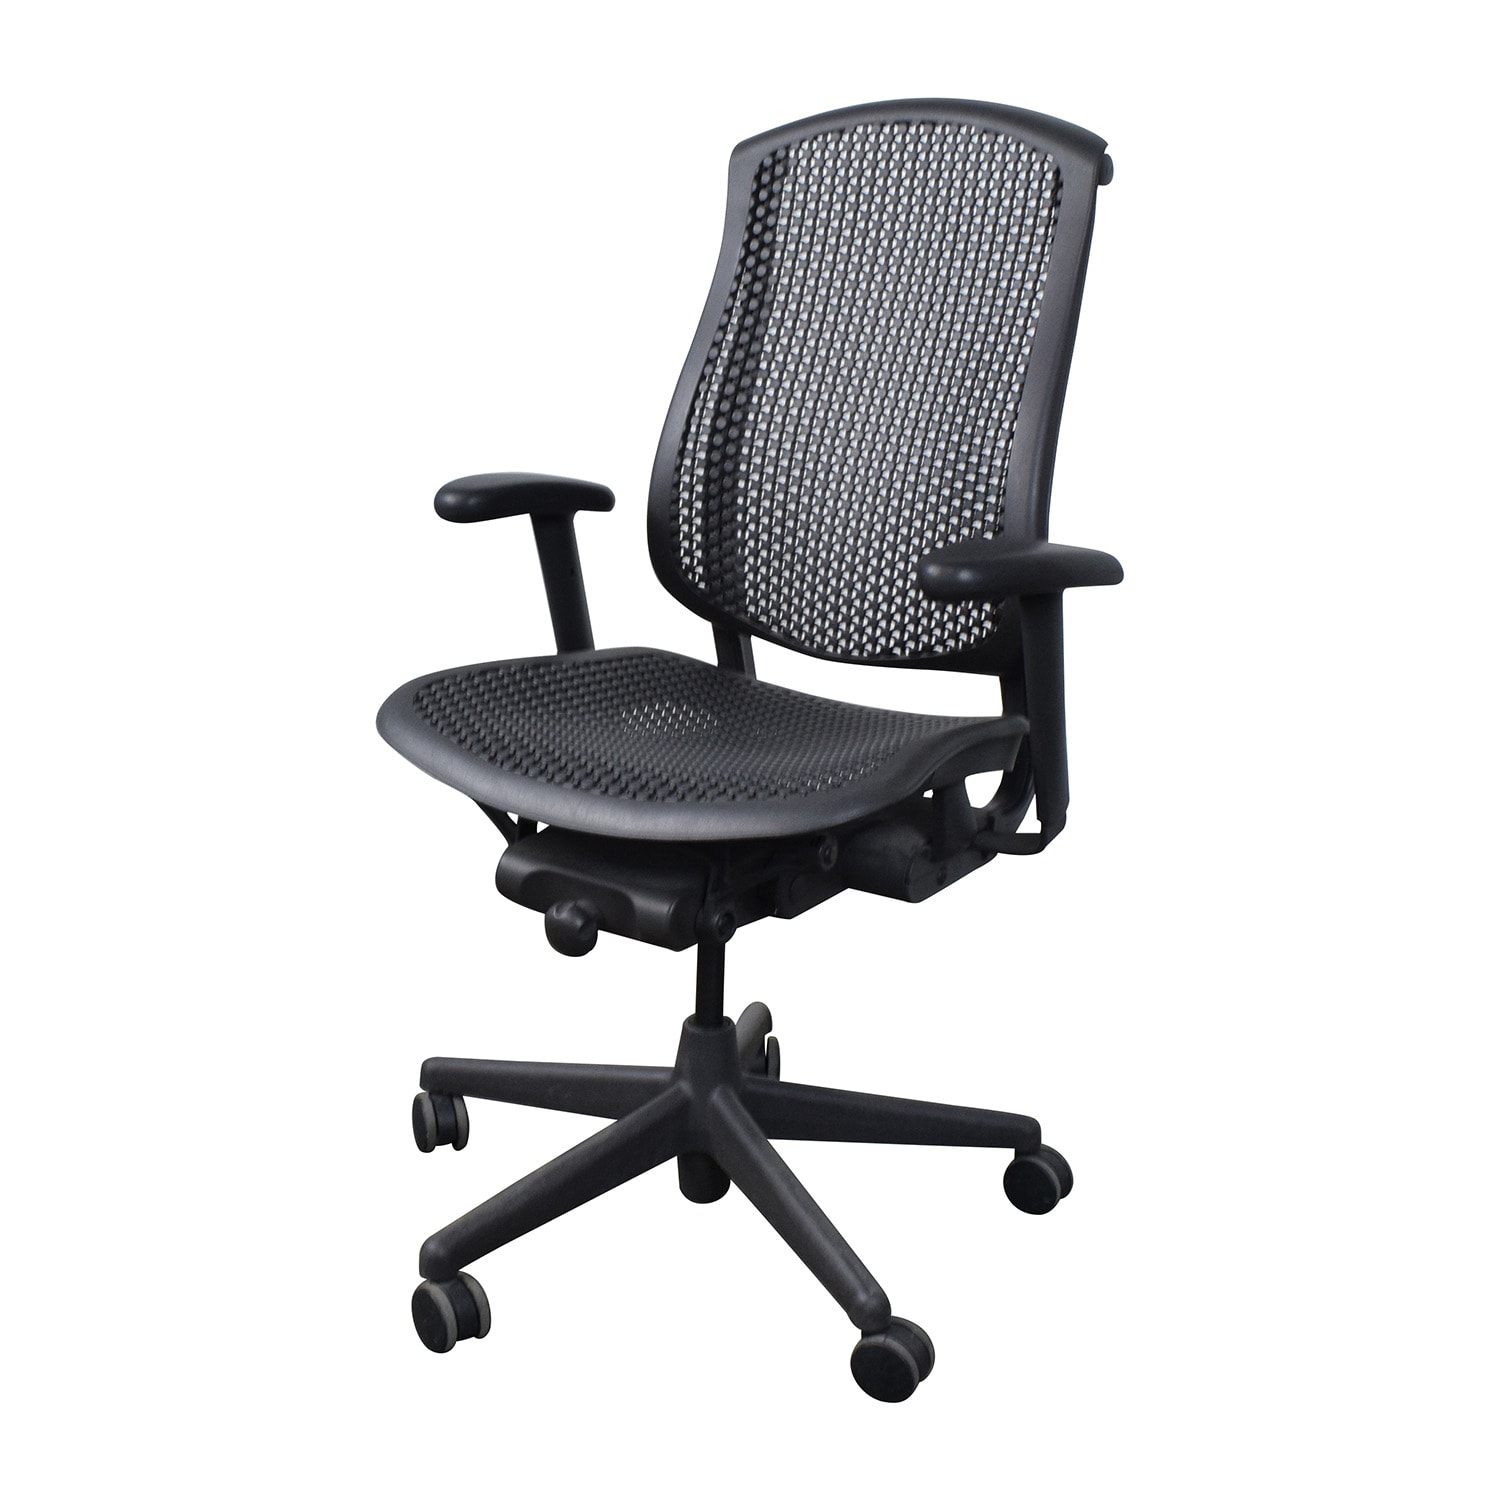 https://res.cloudinary.com/dkqtxtobb/image/upload/f_auto,q_auto:best,w_1500/product-assets/20579/herman-miller/chairs/home-office-chairs/used-herman-miller-areo-office-chair.jpeg